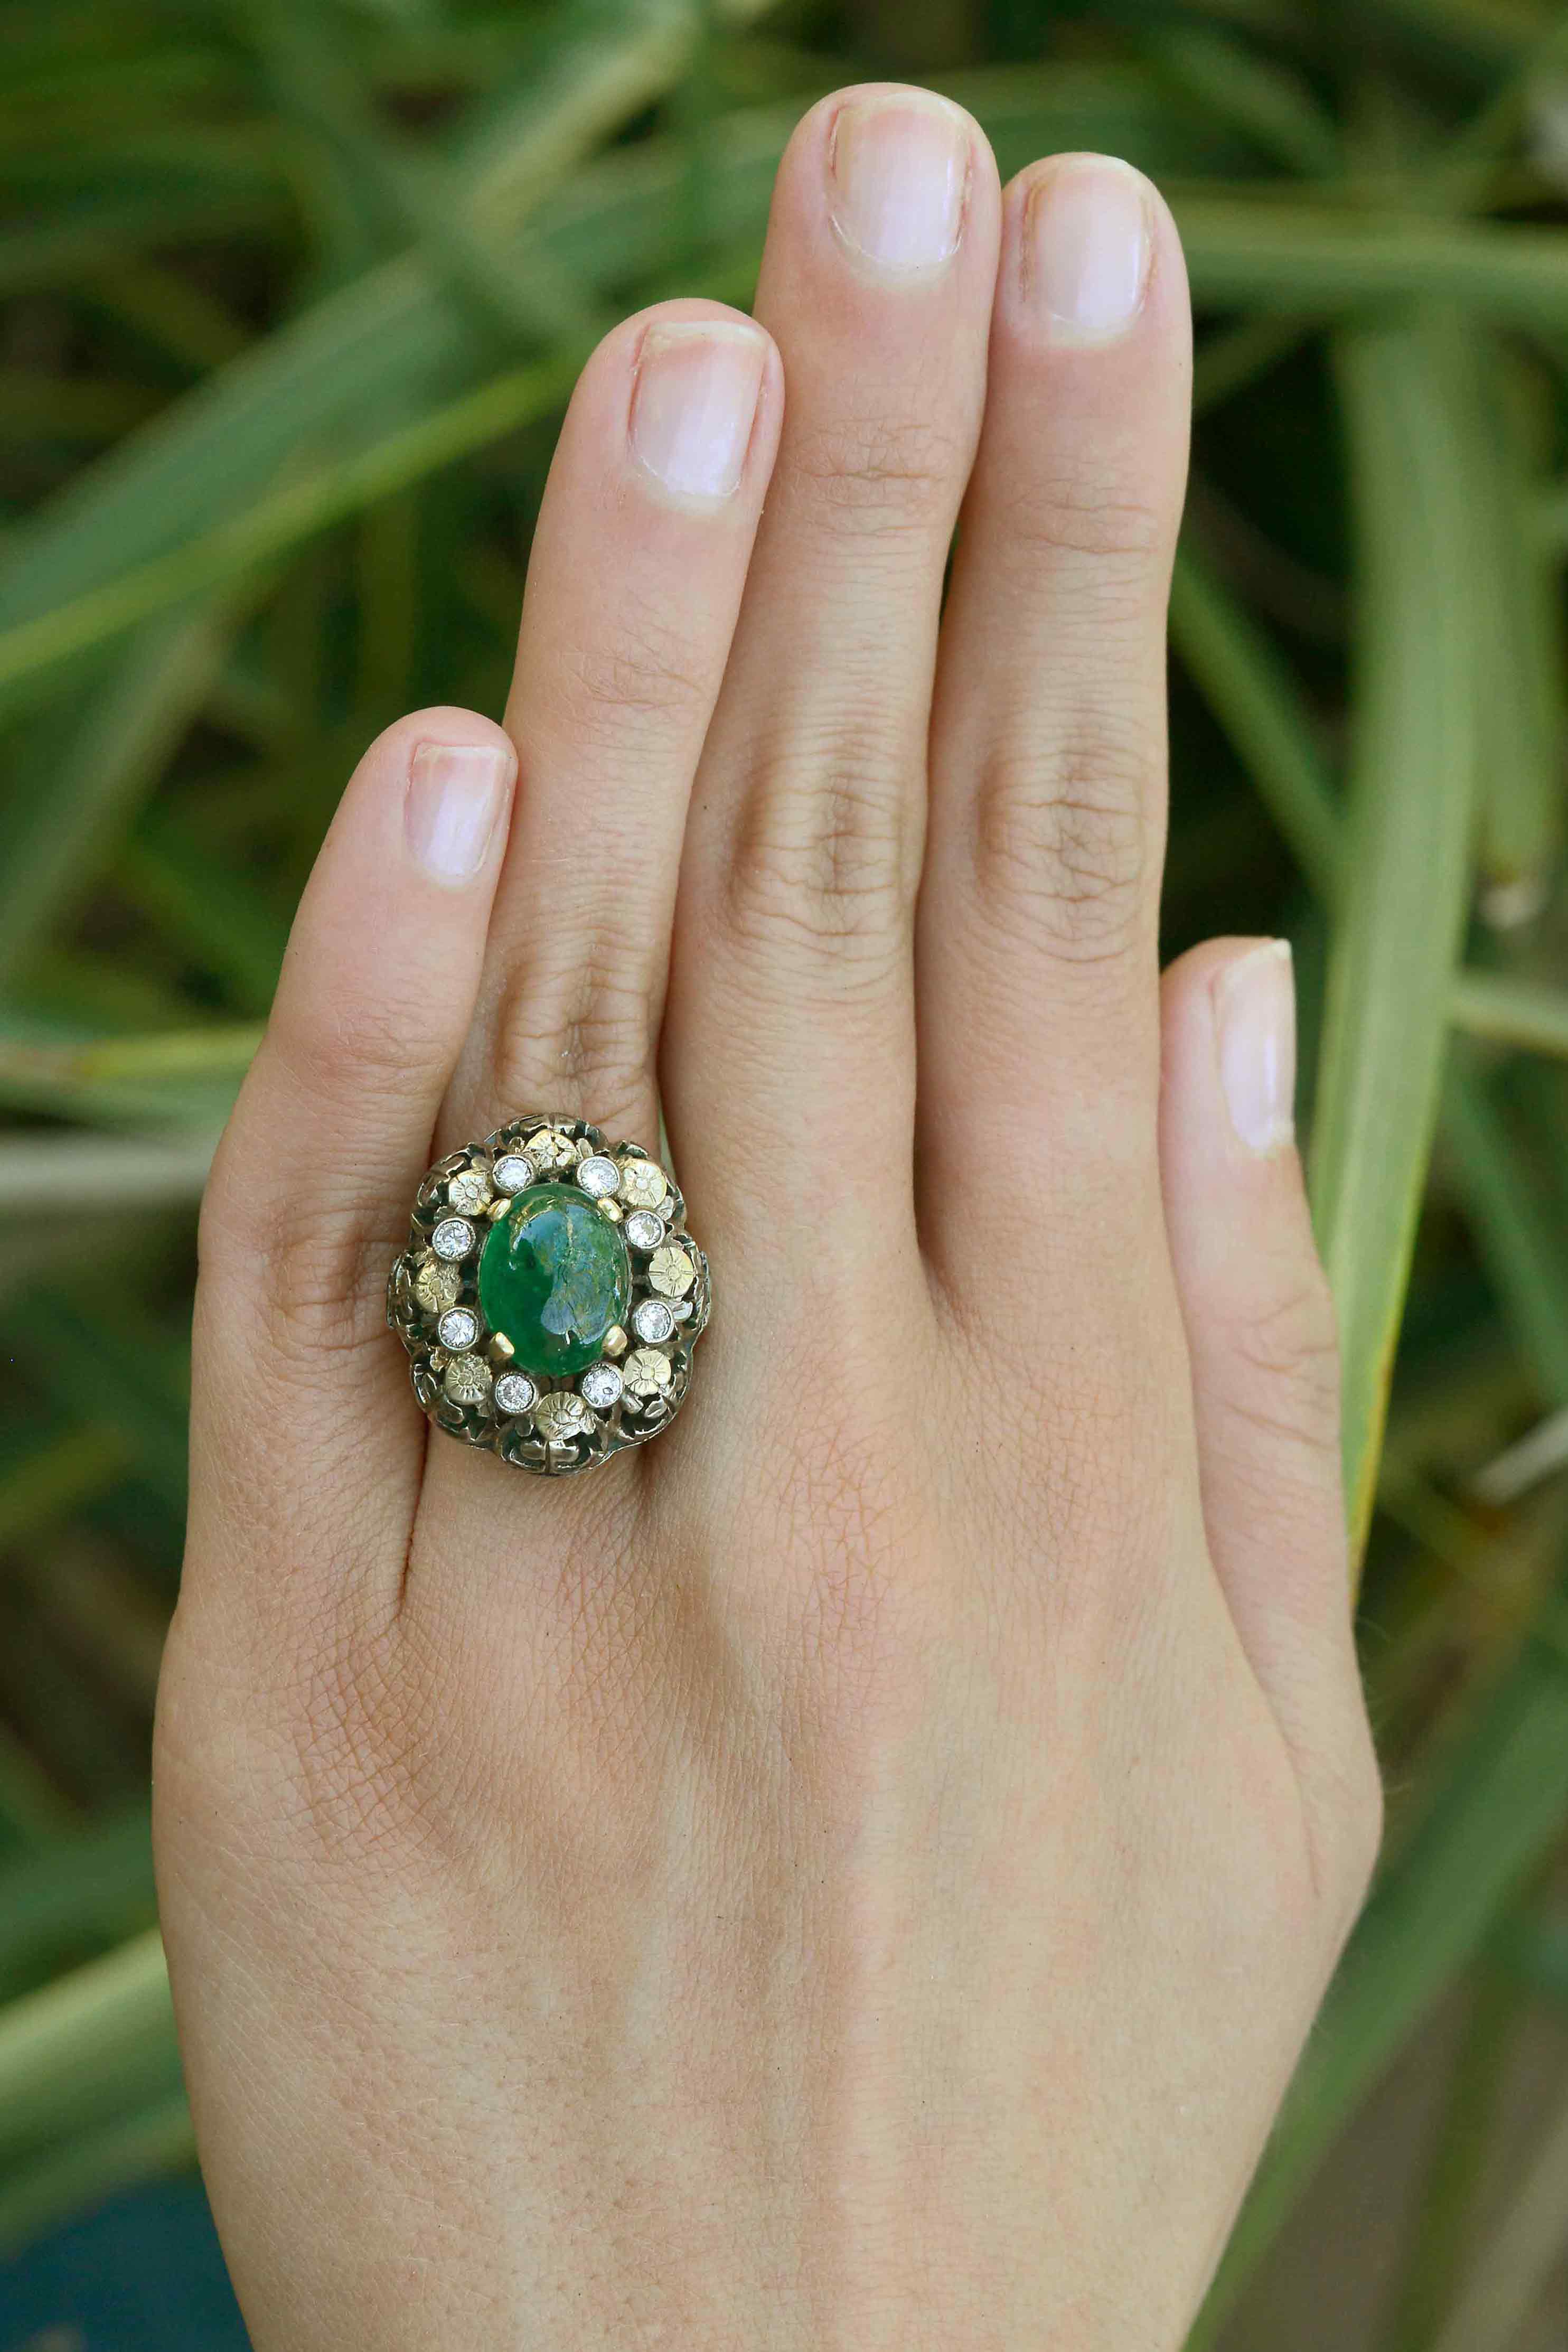 A diamond and flower halo ring with a three carat oval cabochon emerald.